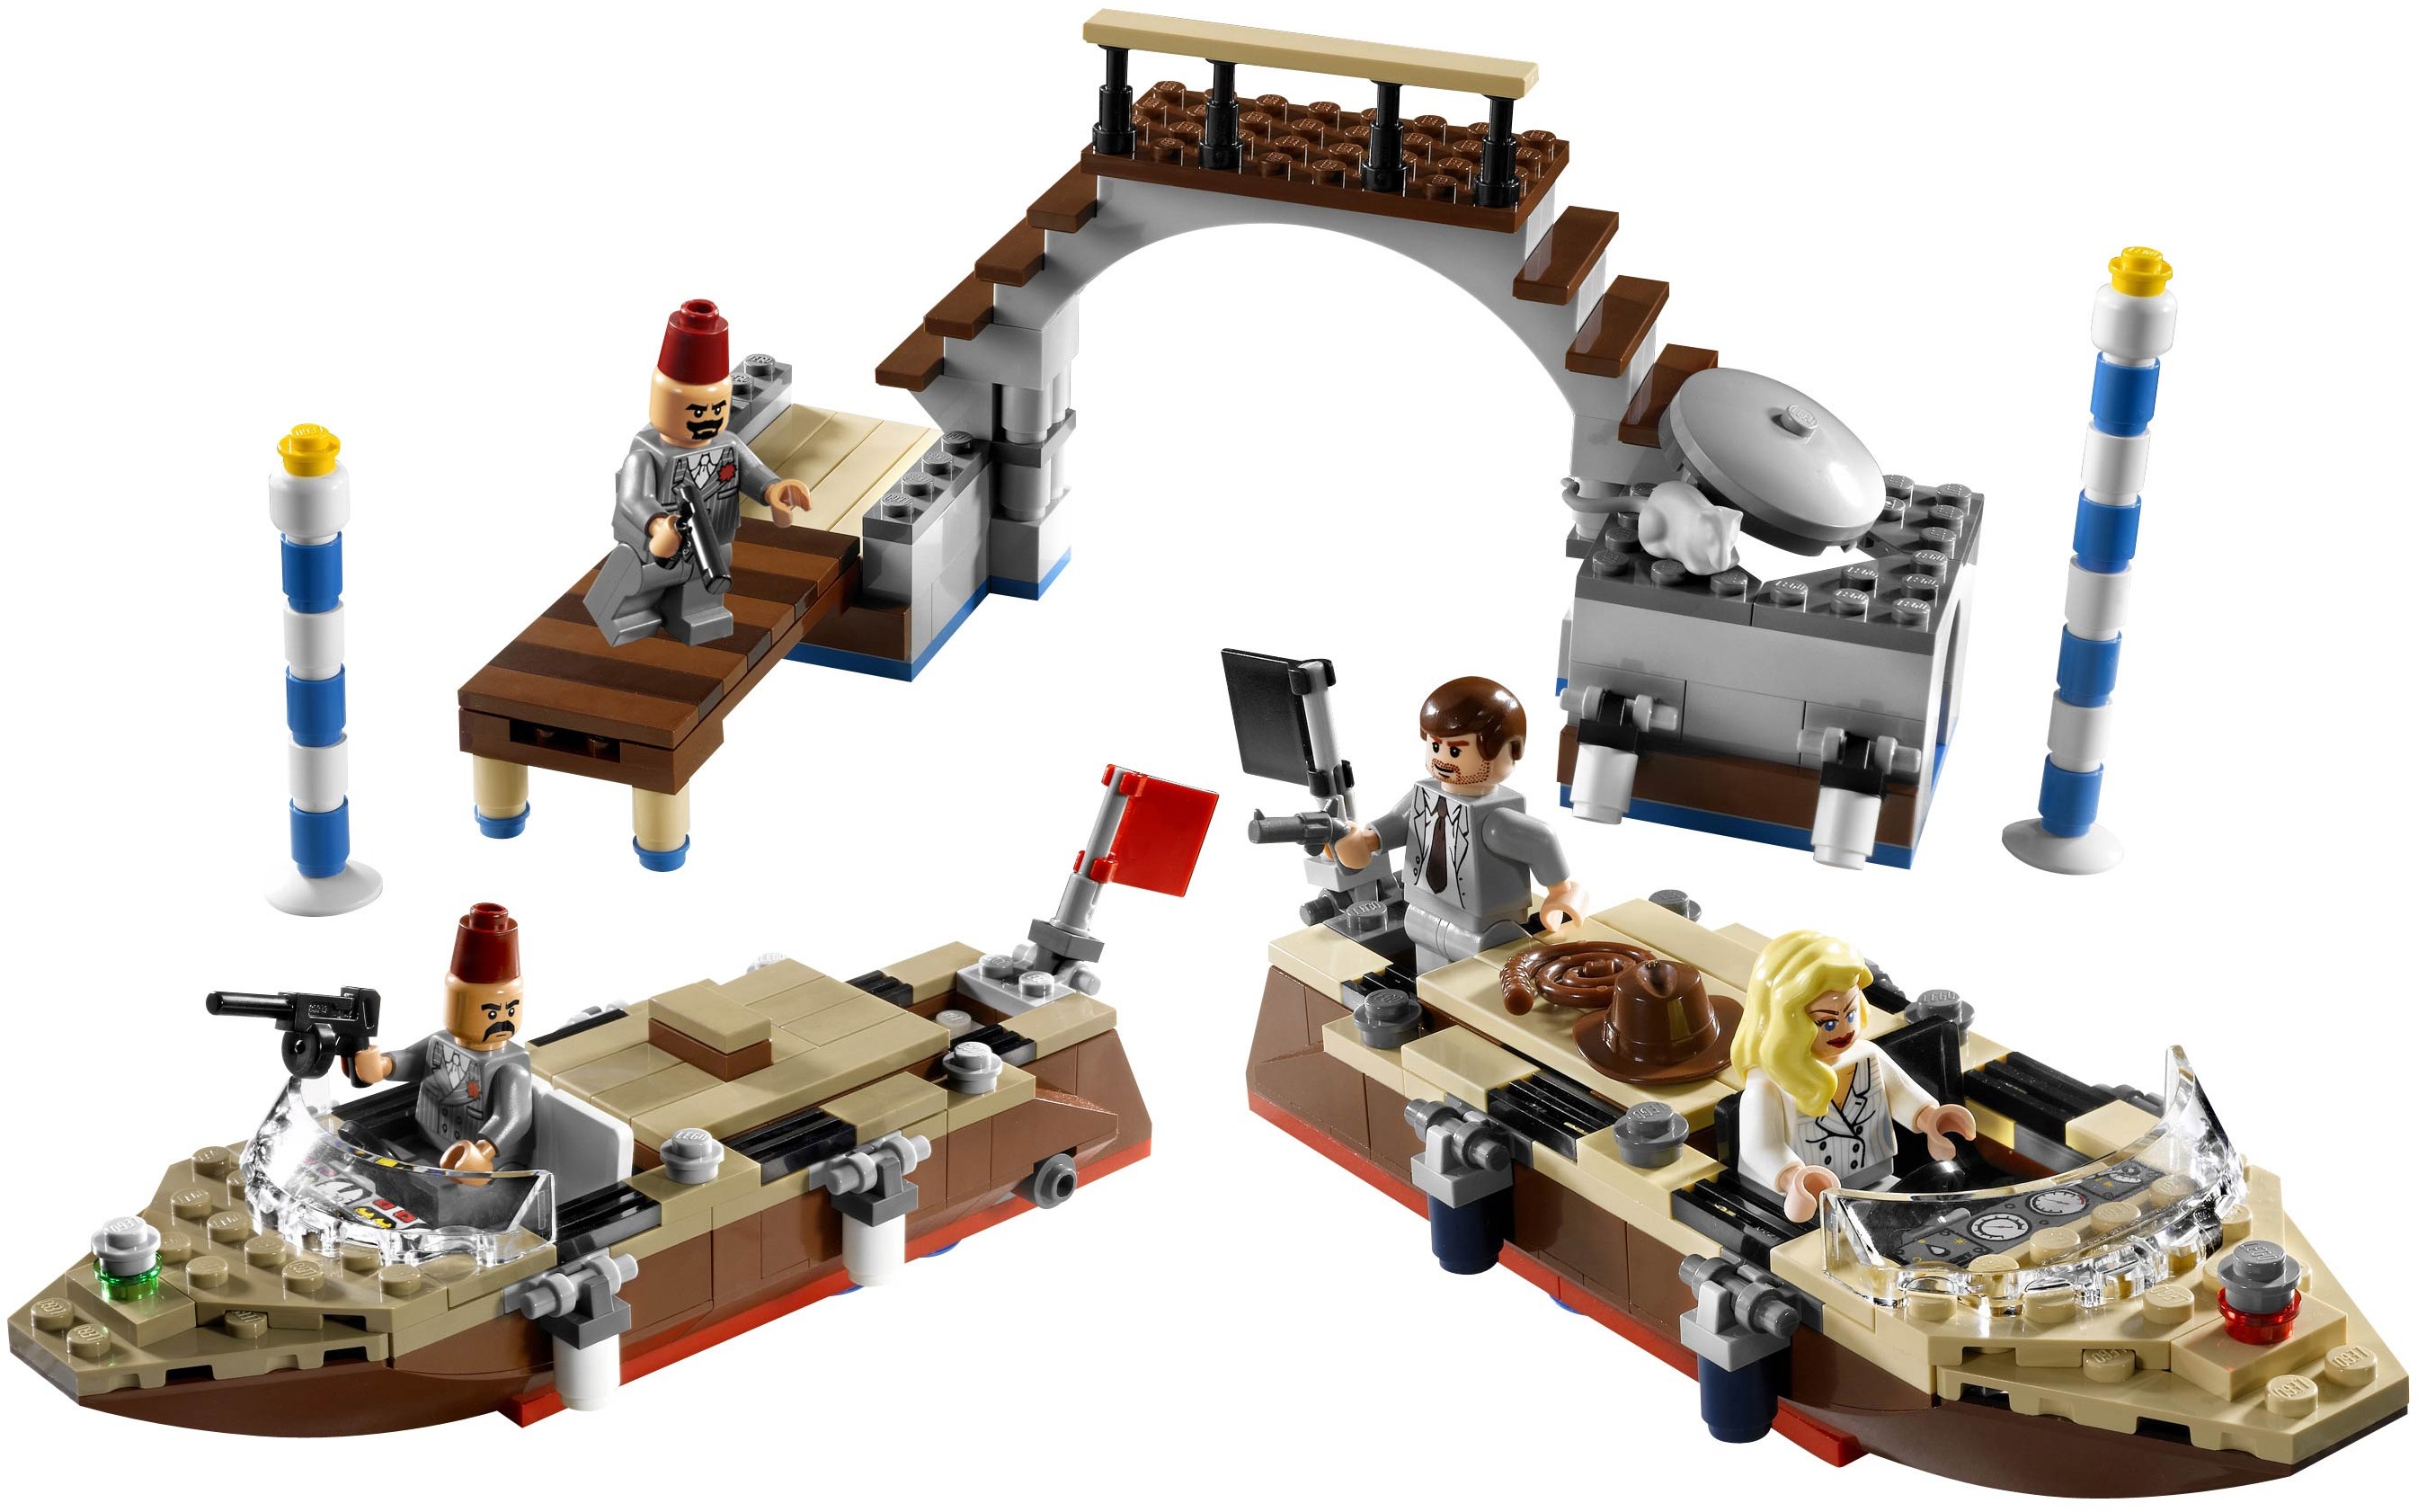 LEGO Releases First INDIANA JONES Sets in Over a Decade - Nerdist